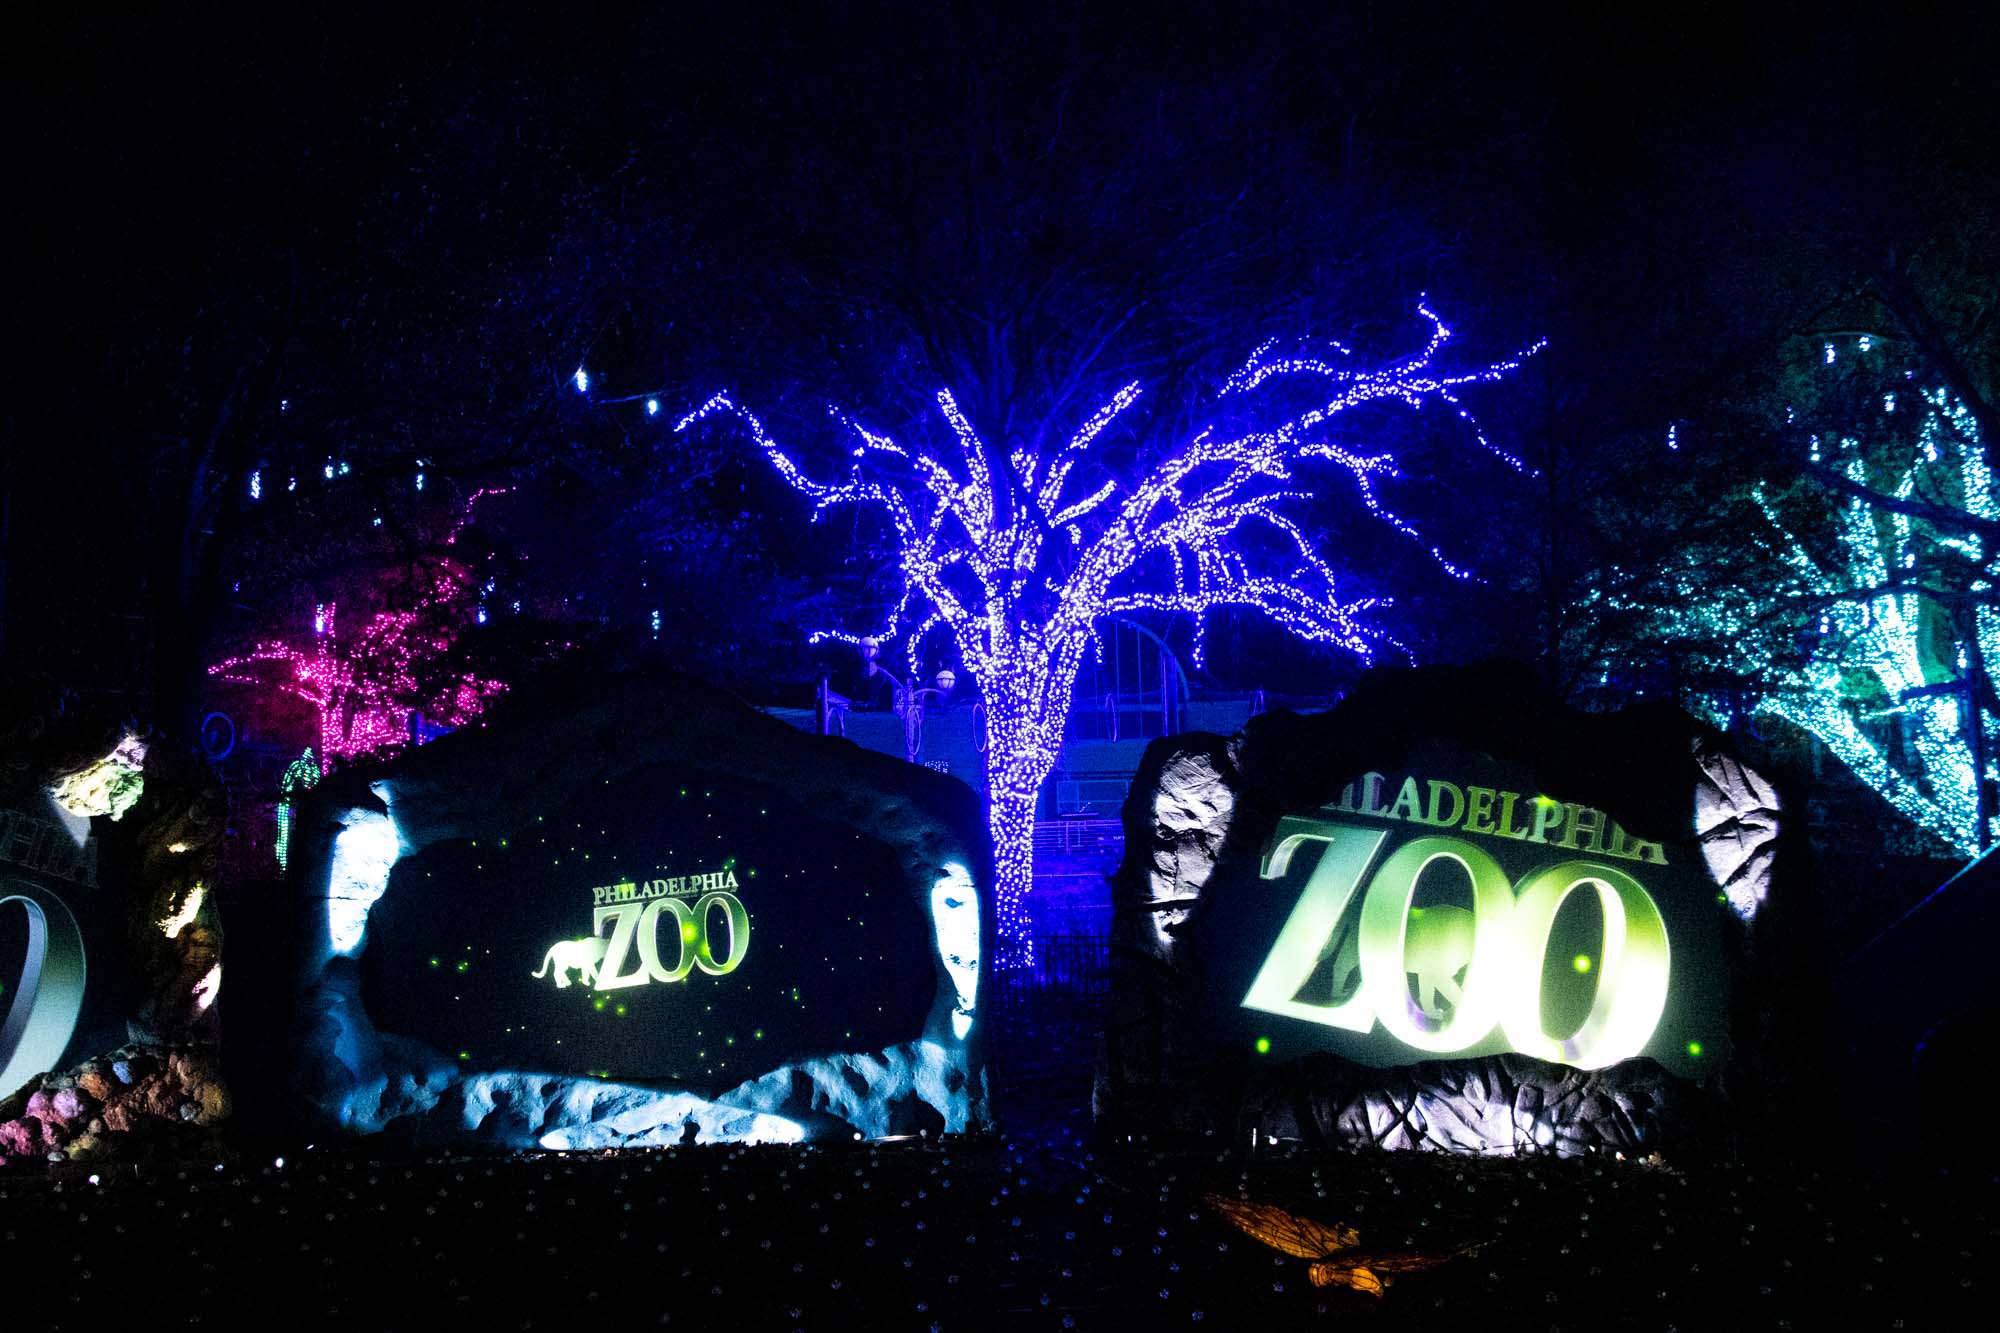 Trees covered in holiday lights with light projections that say "Philadelphia Zoo"